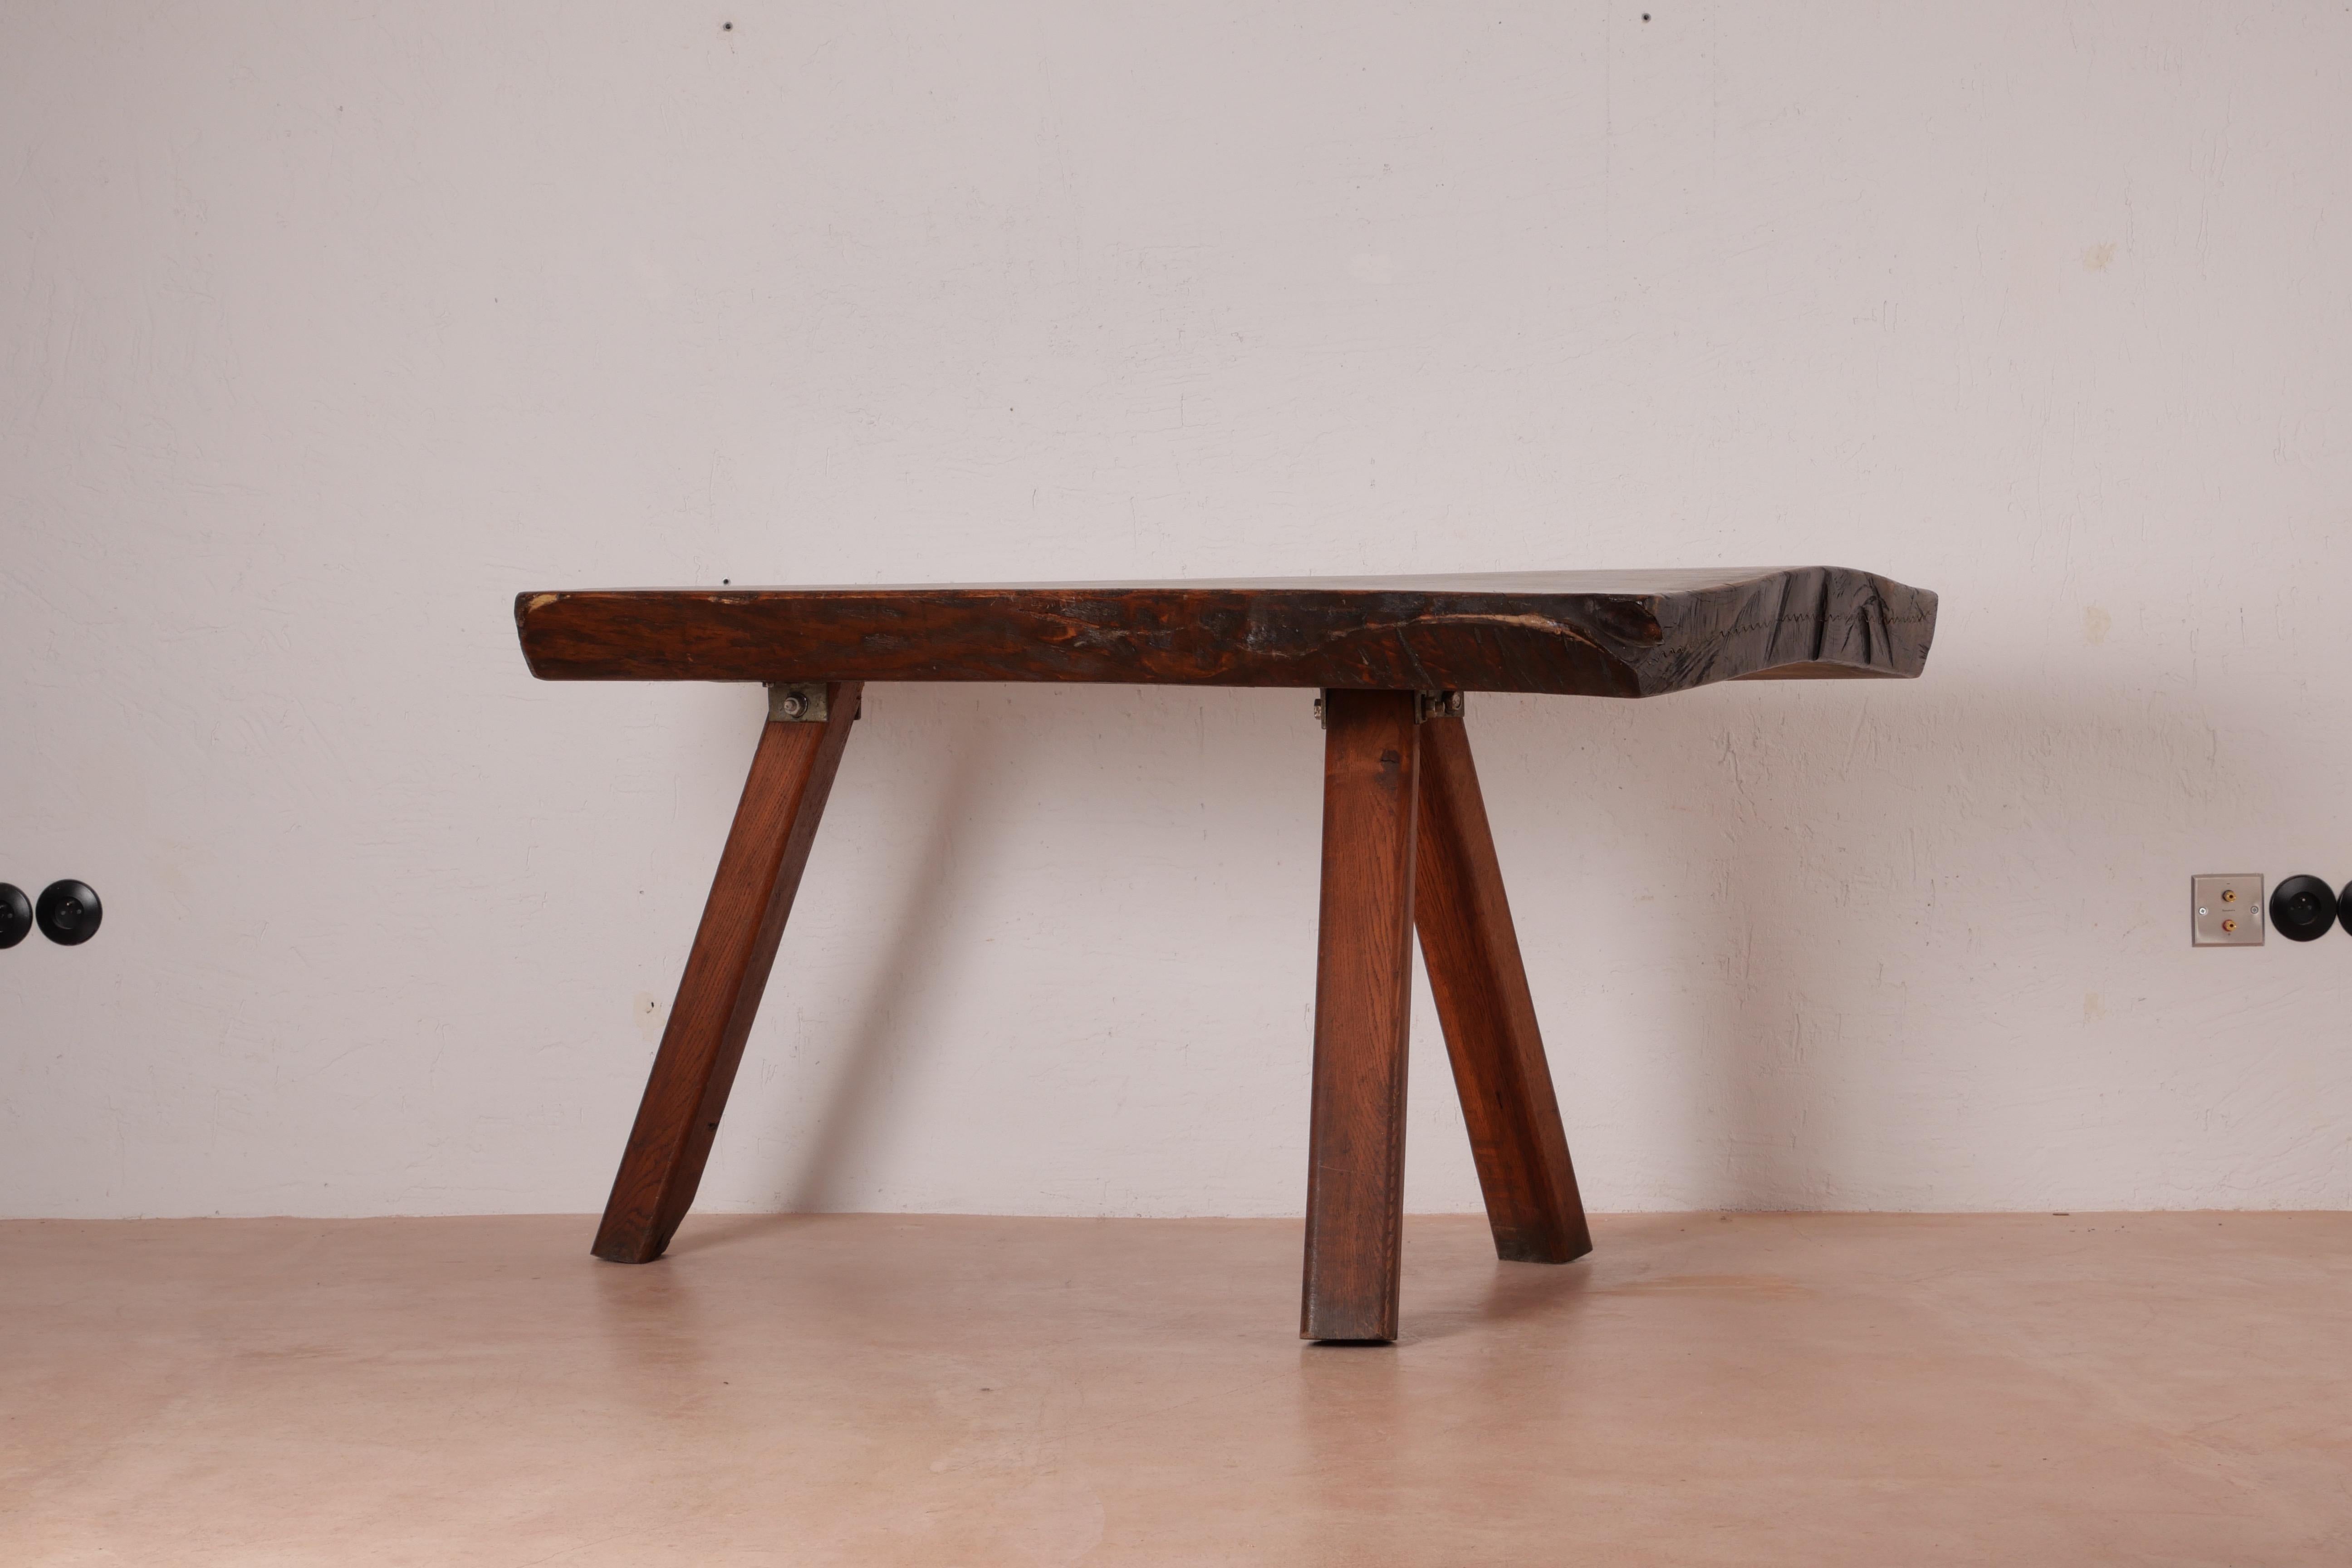 This sculptural Brutalist table has been handmade from solid pine slabs by Mobichalet of Belgium in the 1950s. The parts have been joined in a fashion that feels rudimentary and rustic on purpose, harking back to earlier Alpine craftsmanship –